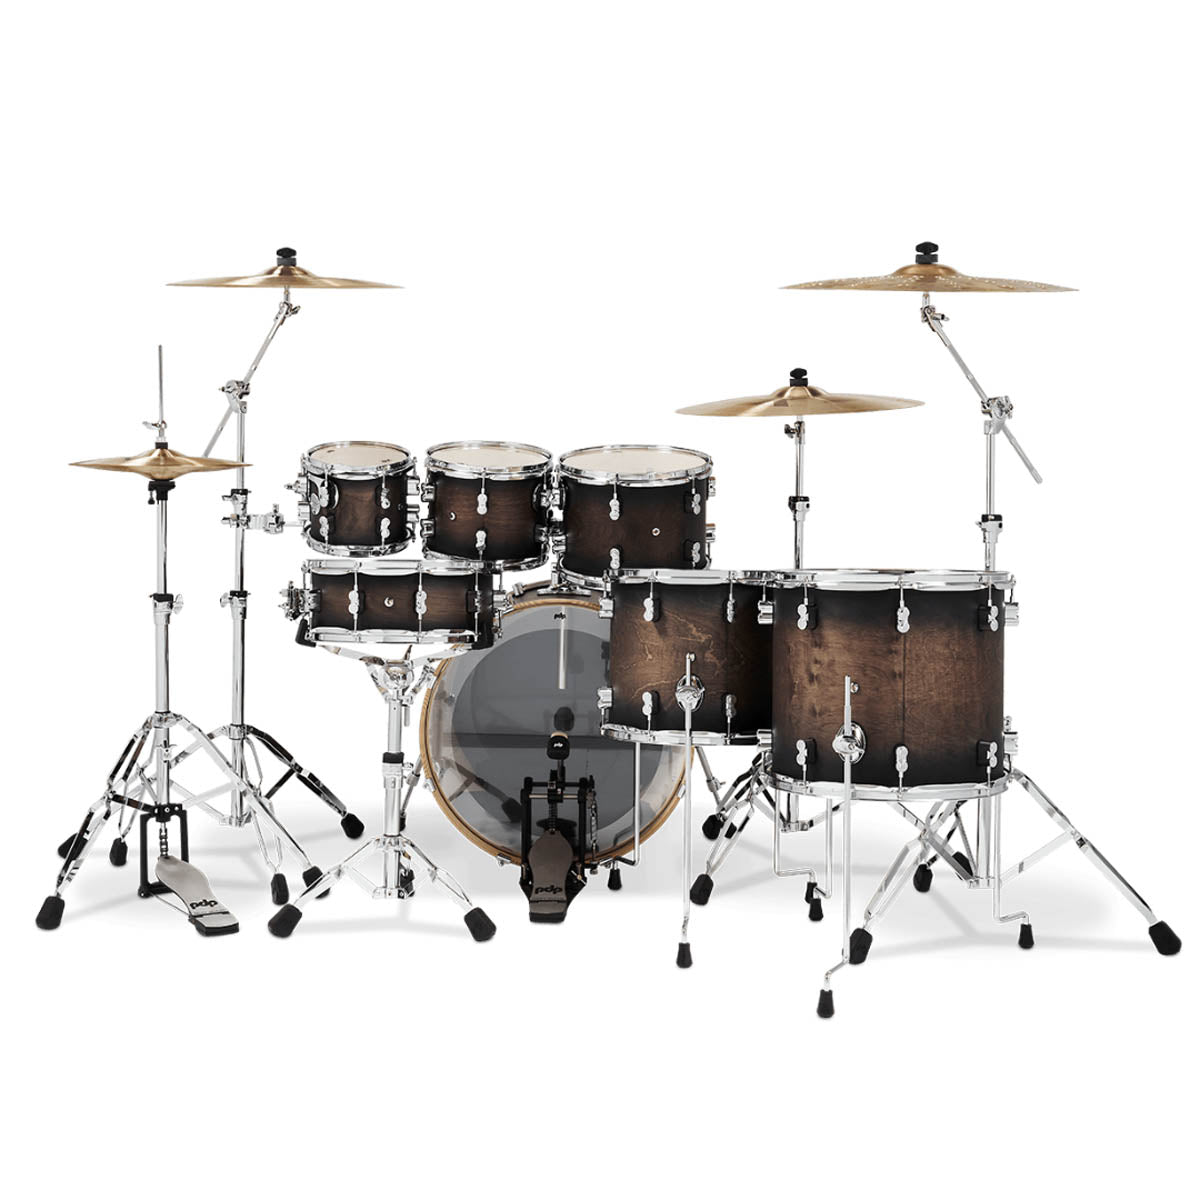 PDP by DW Concept Maple 7-Piece Shell Pack - Lacquer